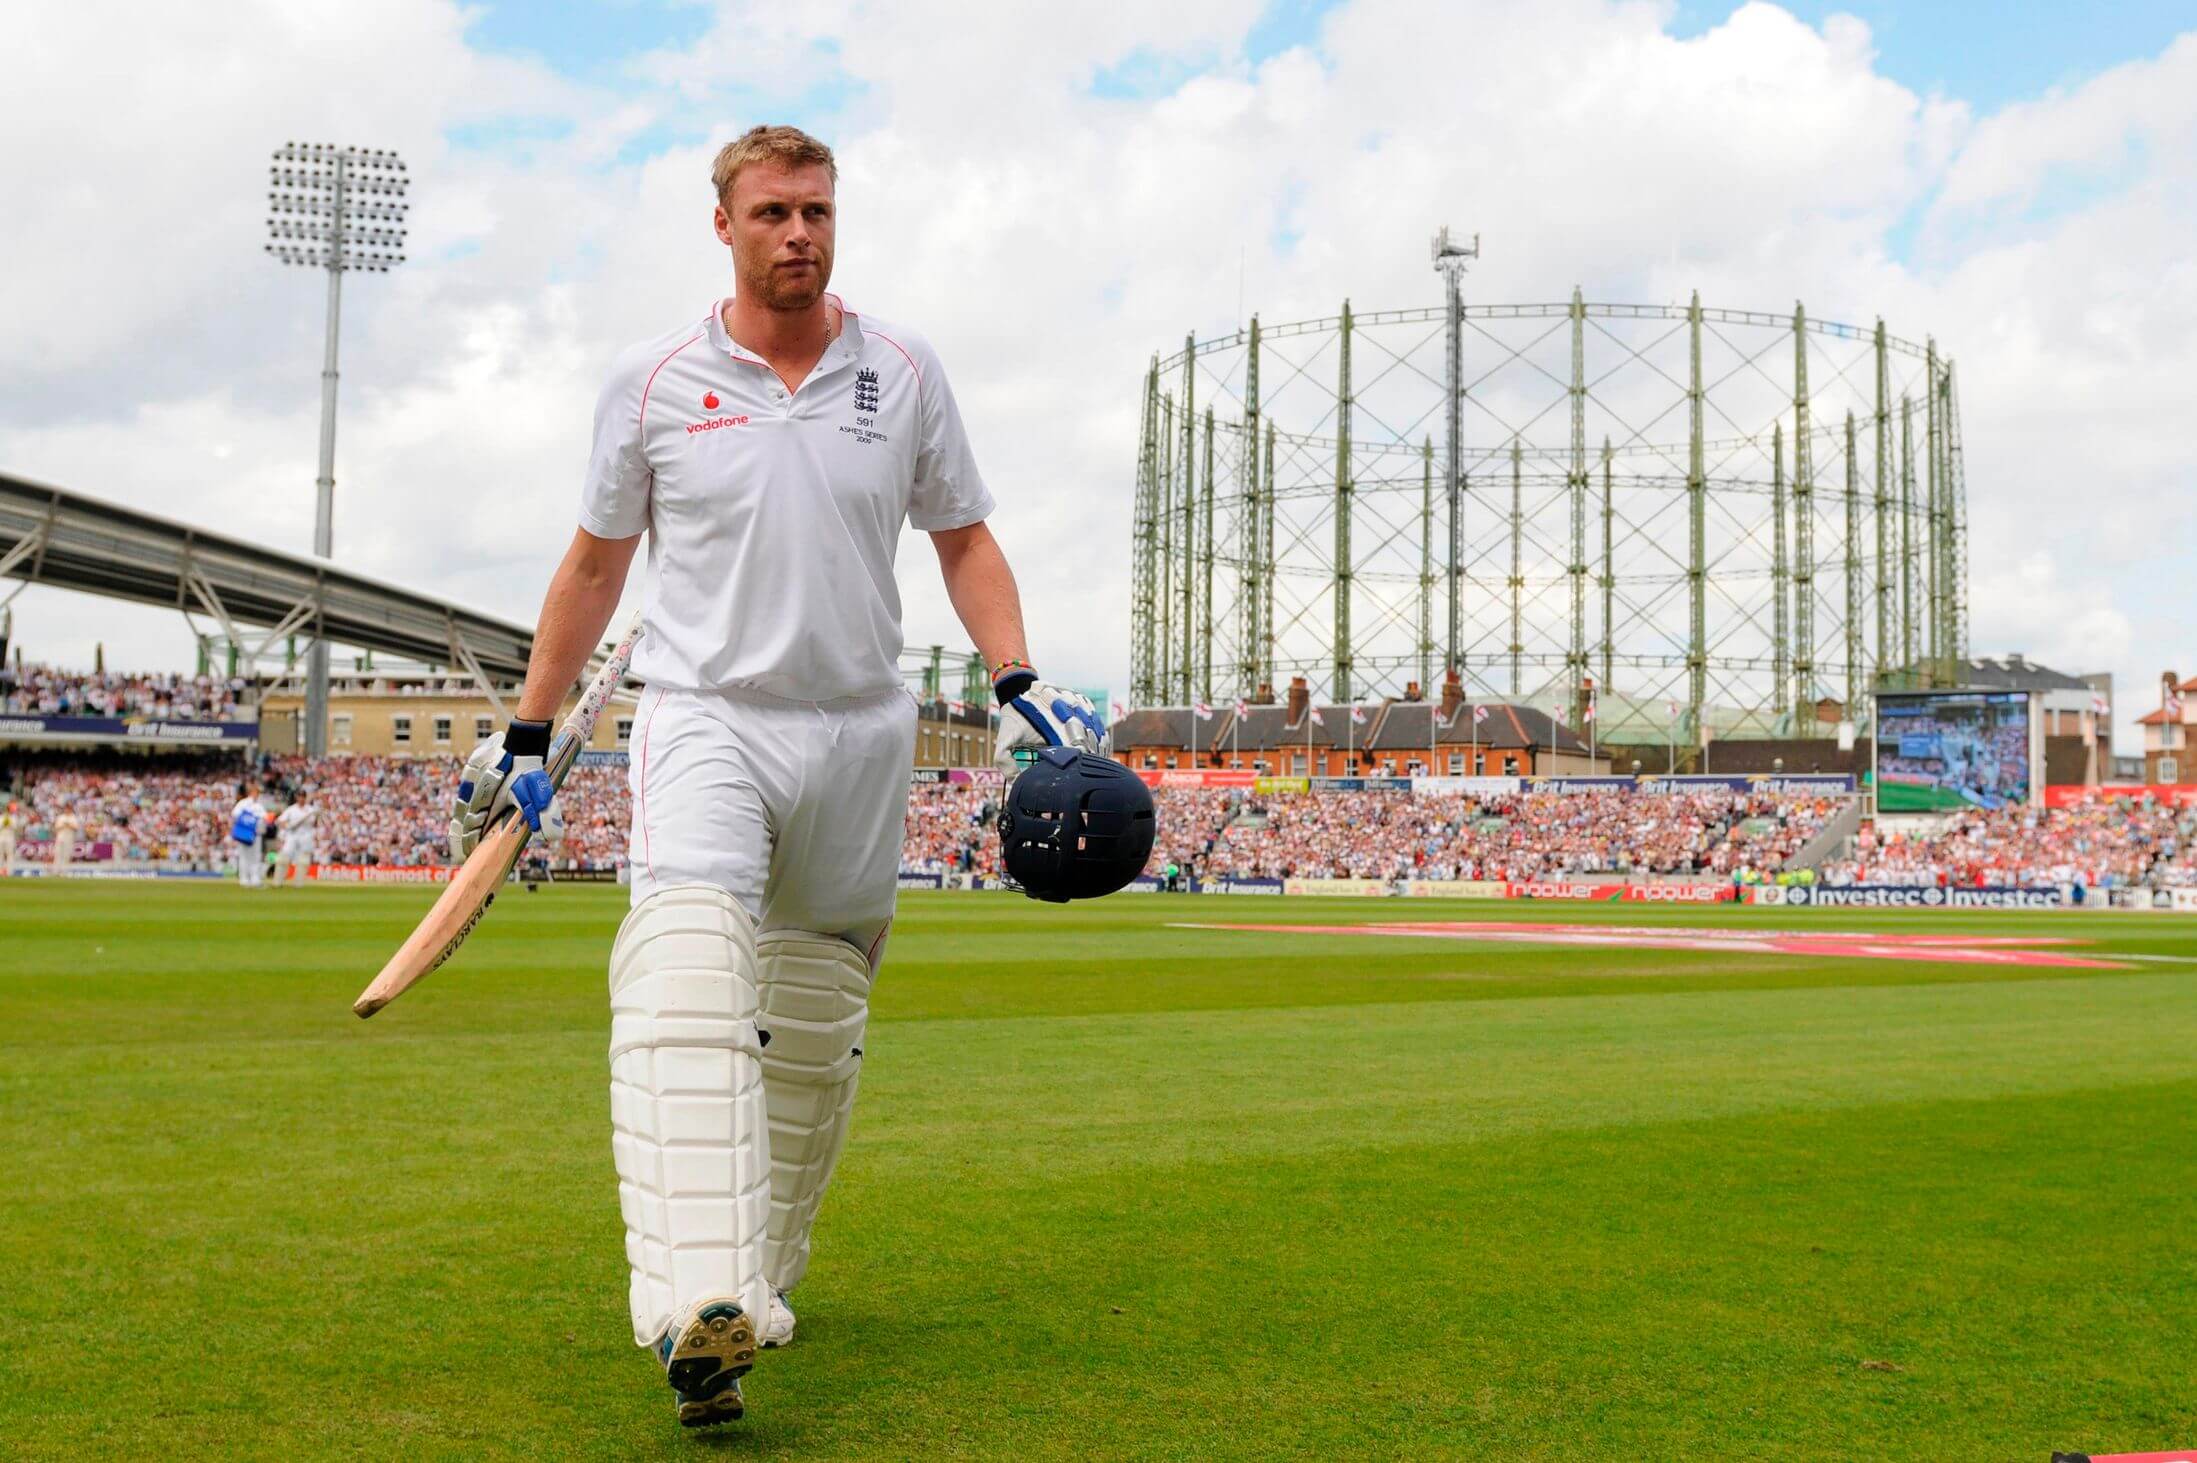 Andrew Flintoff Cricketers Whose Careers Ended due to Injuries